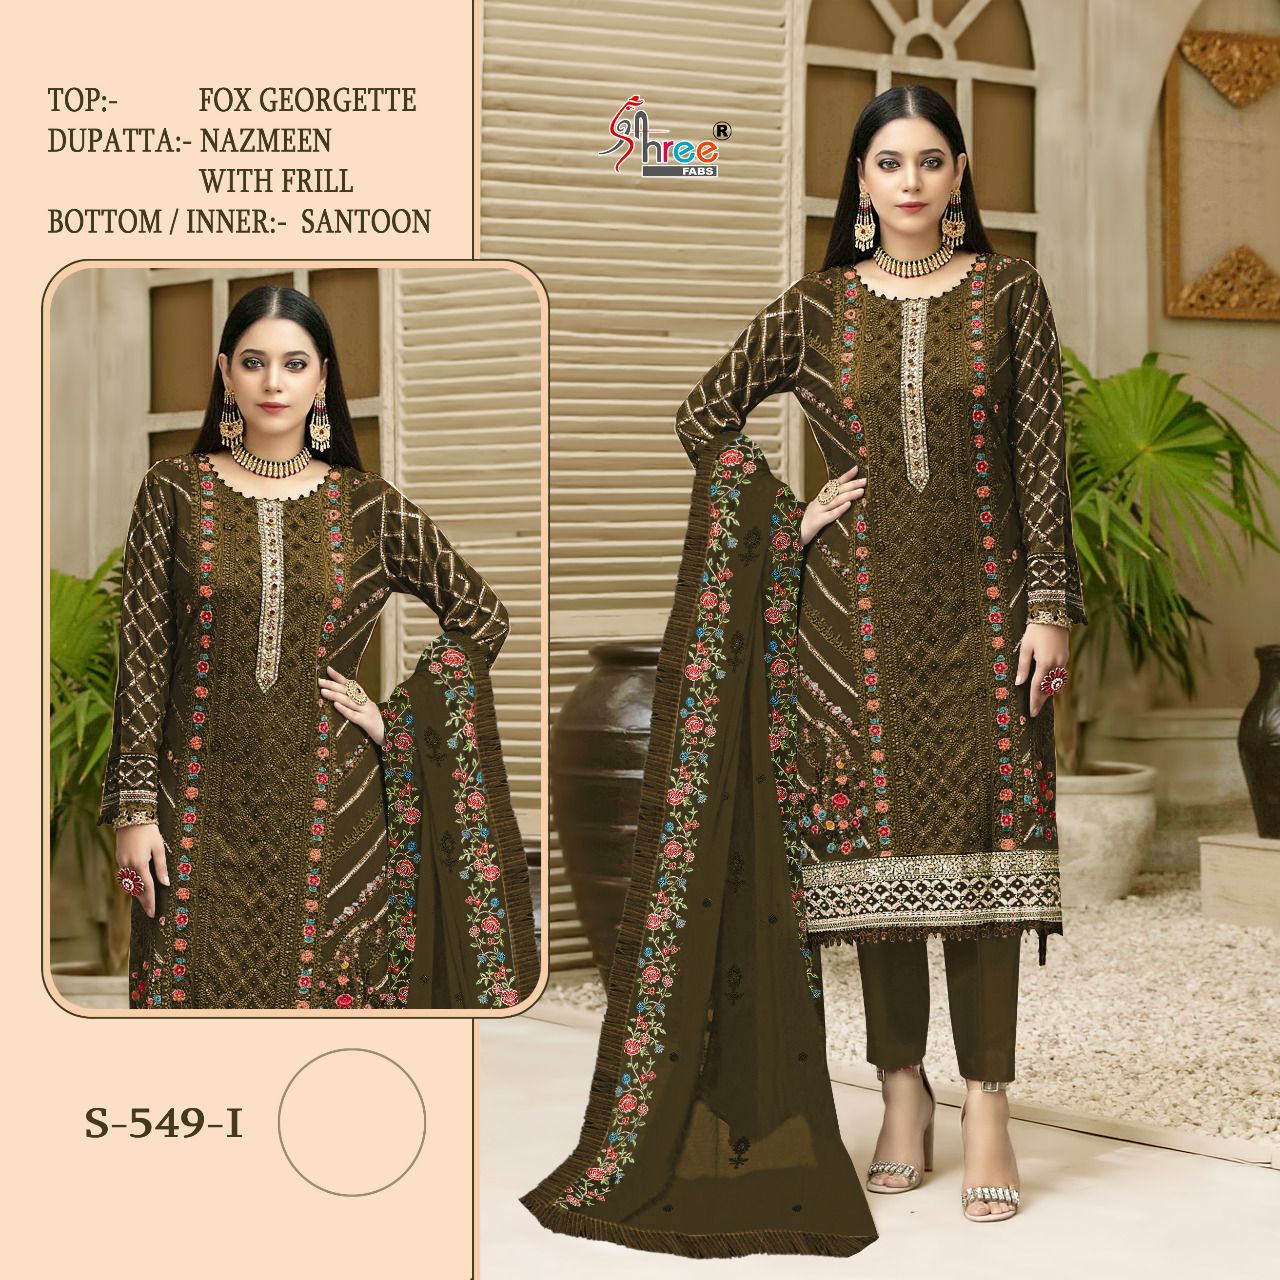 SHREE FABS S 549 I PAKISTANI SUITS IN INDIA